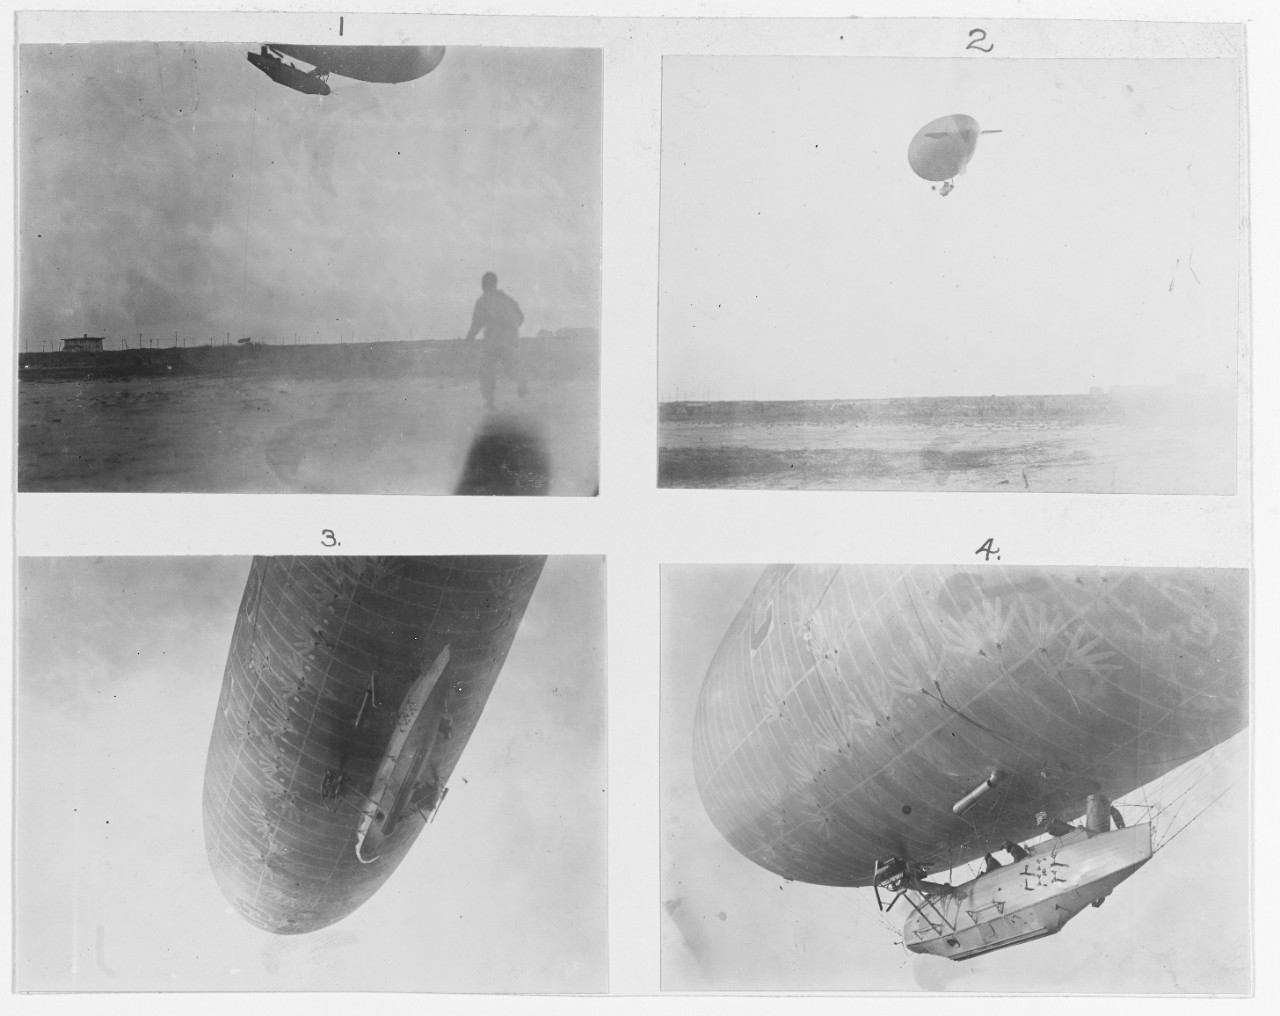 Aerial pickup of fuel by blimp C-3, Naval Air Station Cape May, New Jersey, 30 January 1919.